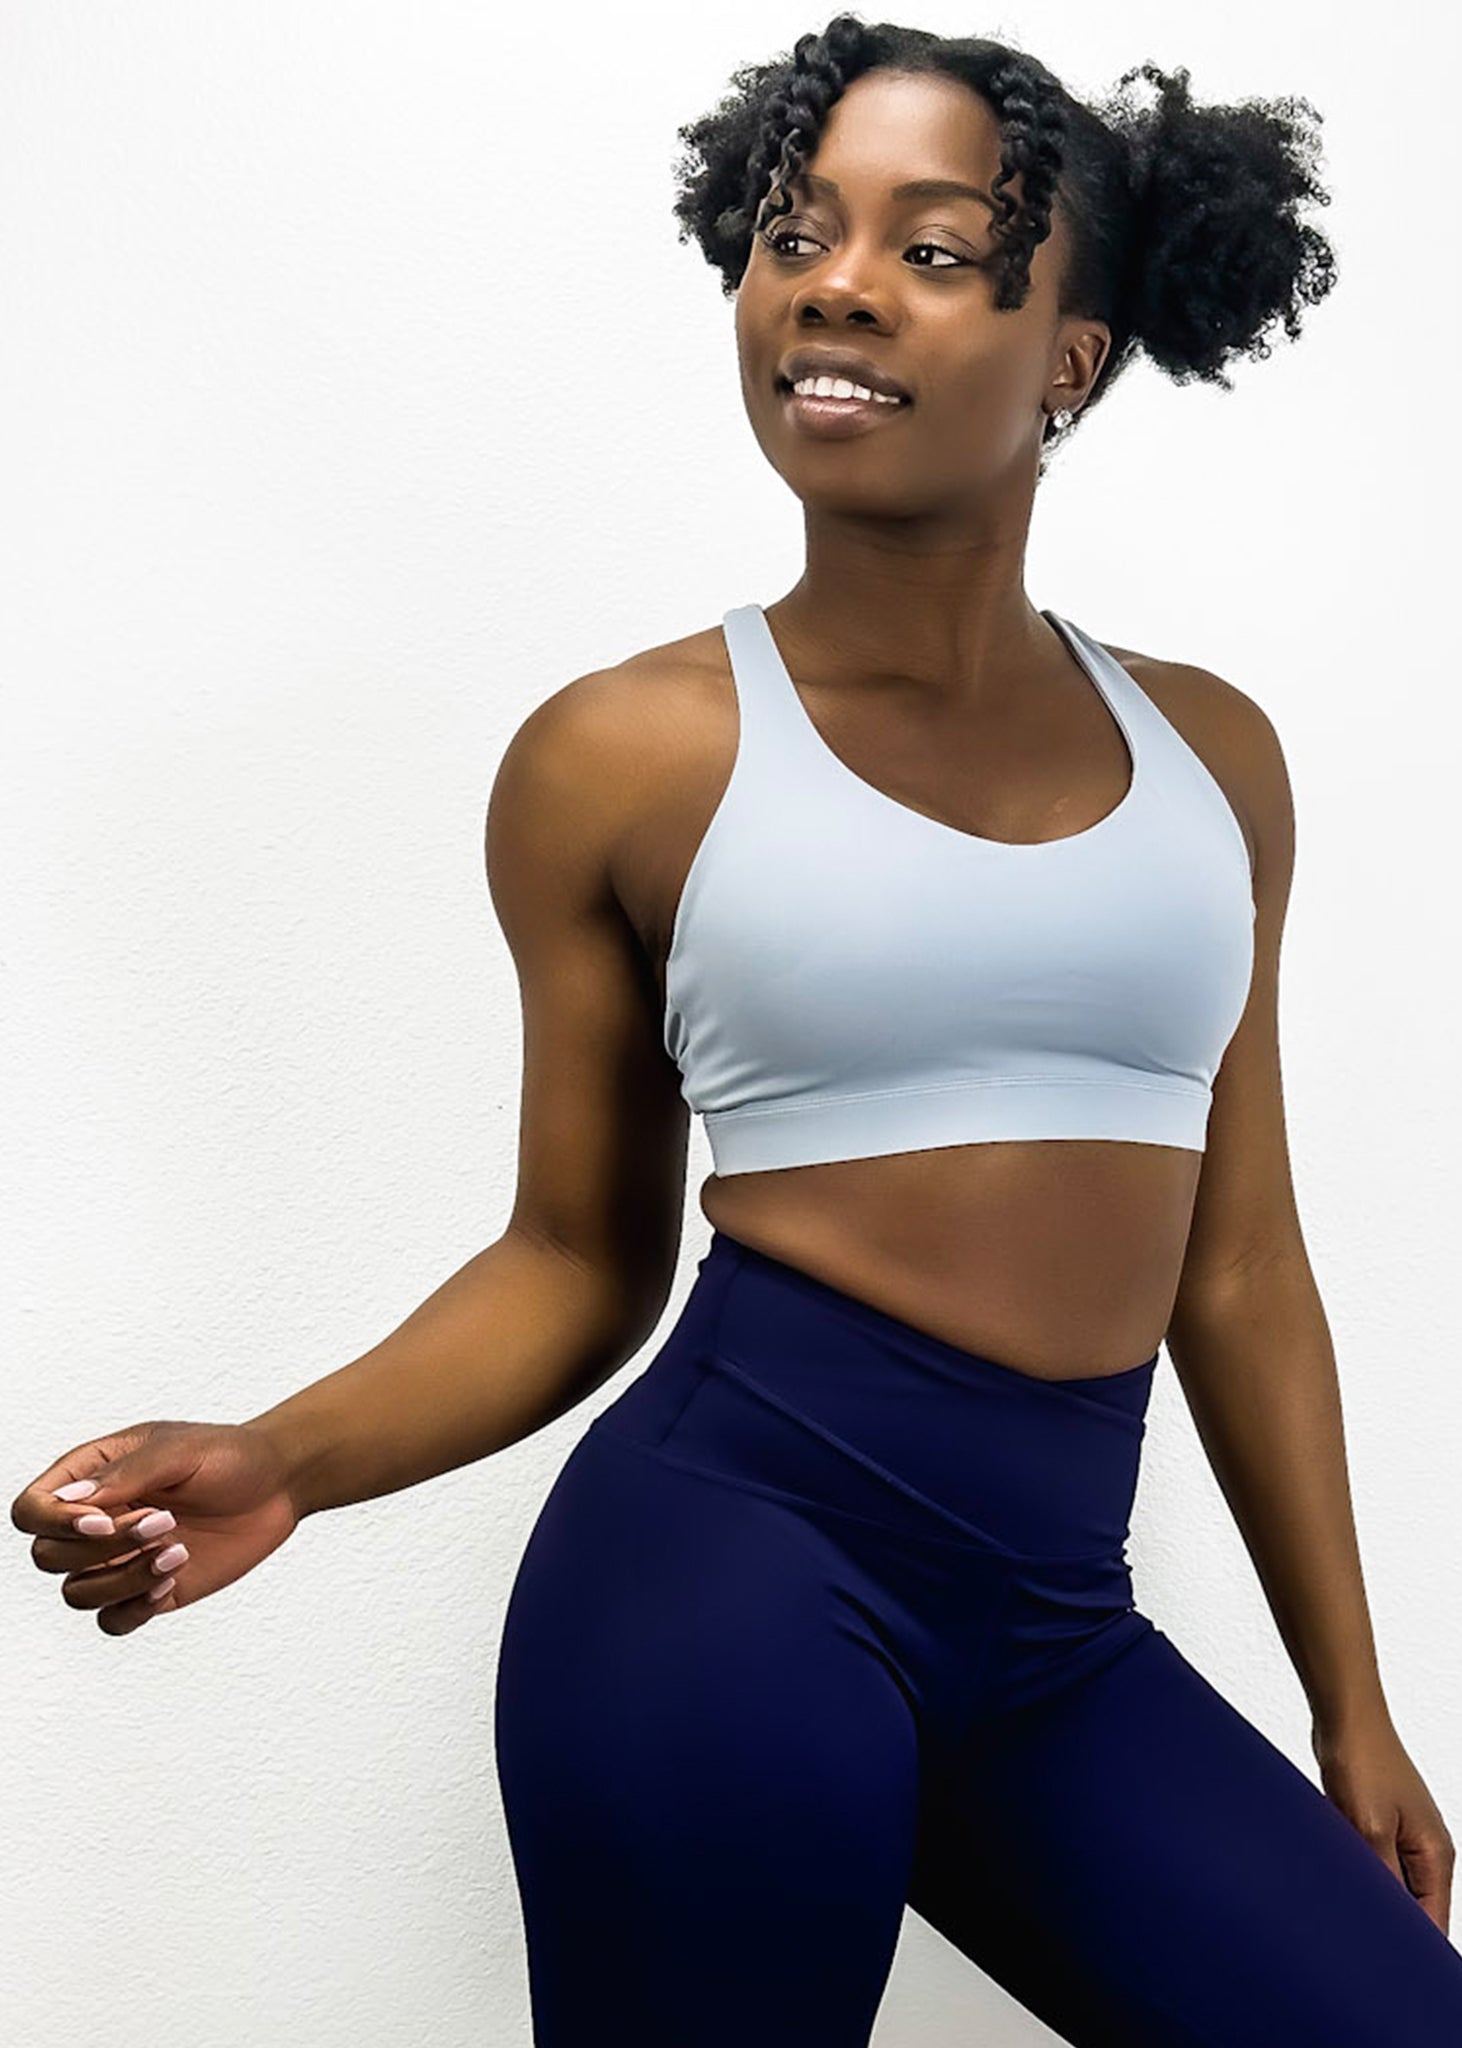 Yoga Clothing Sportswear Feels Buttery Soft Fitness Set Athletic